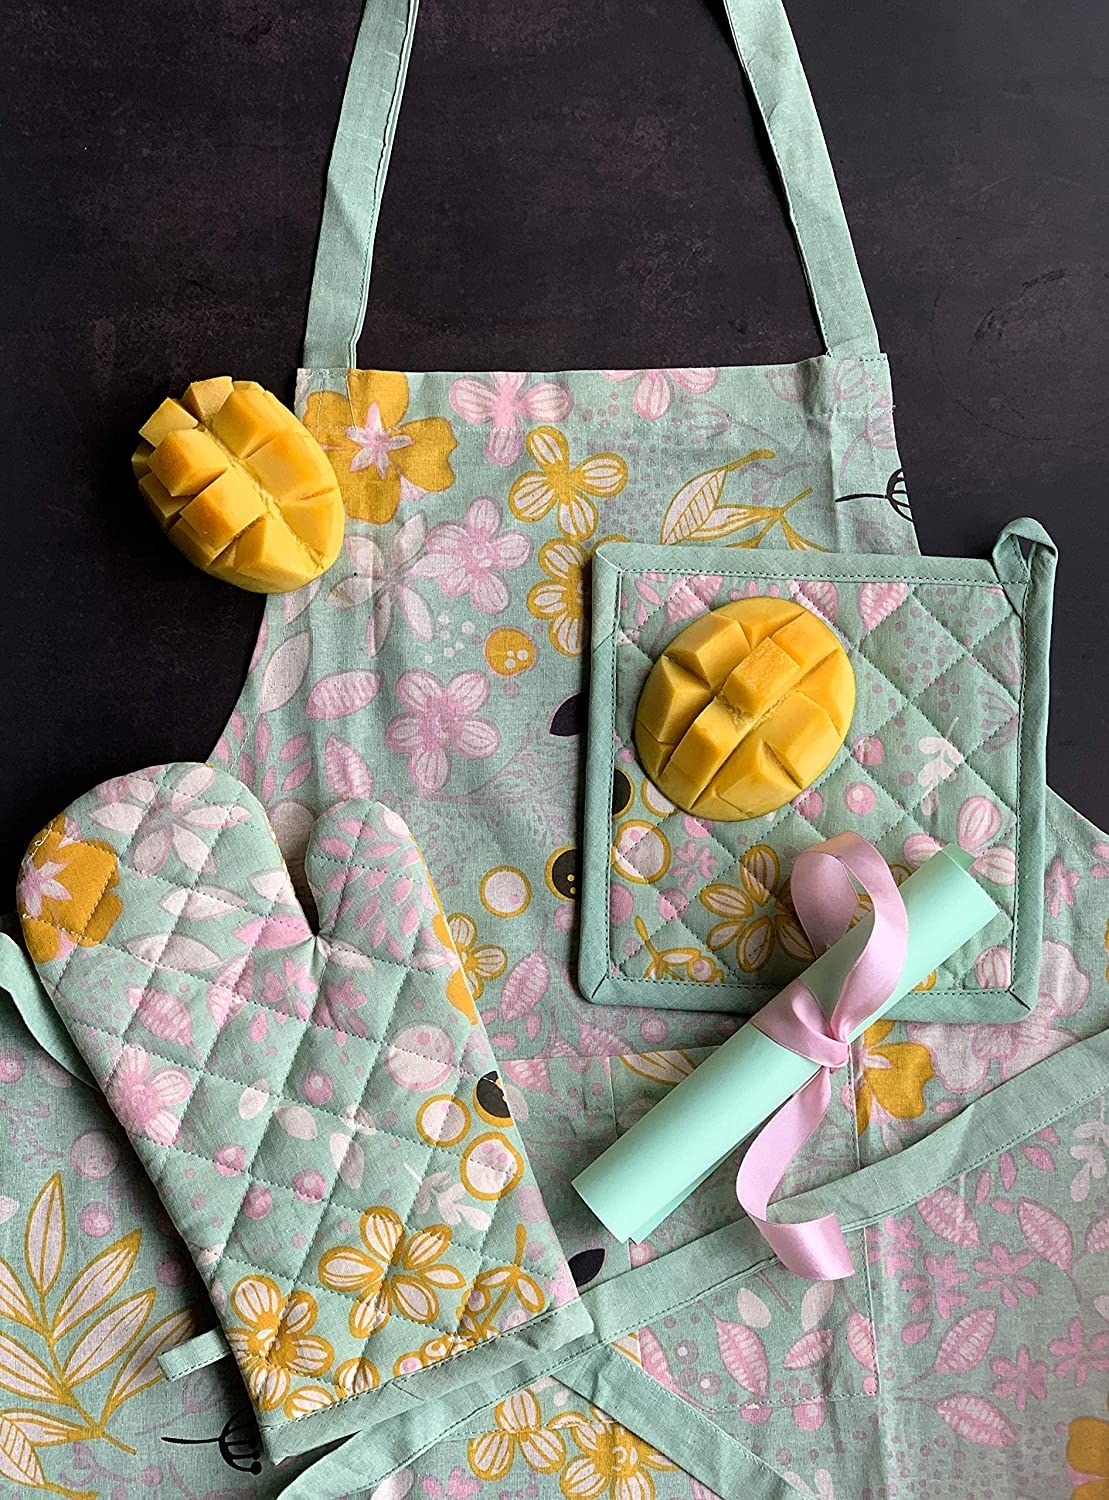 A pastel teal apron with oven mitts and a pot holder that has a yellow and pink floral pattern on it.